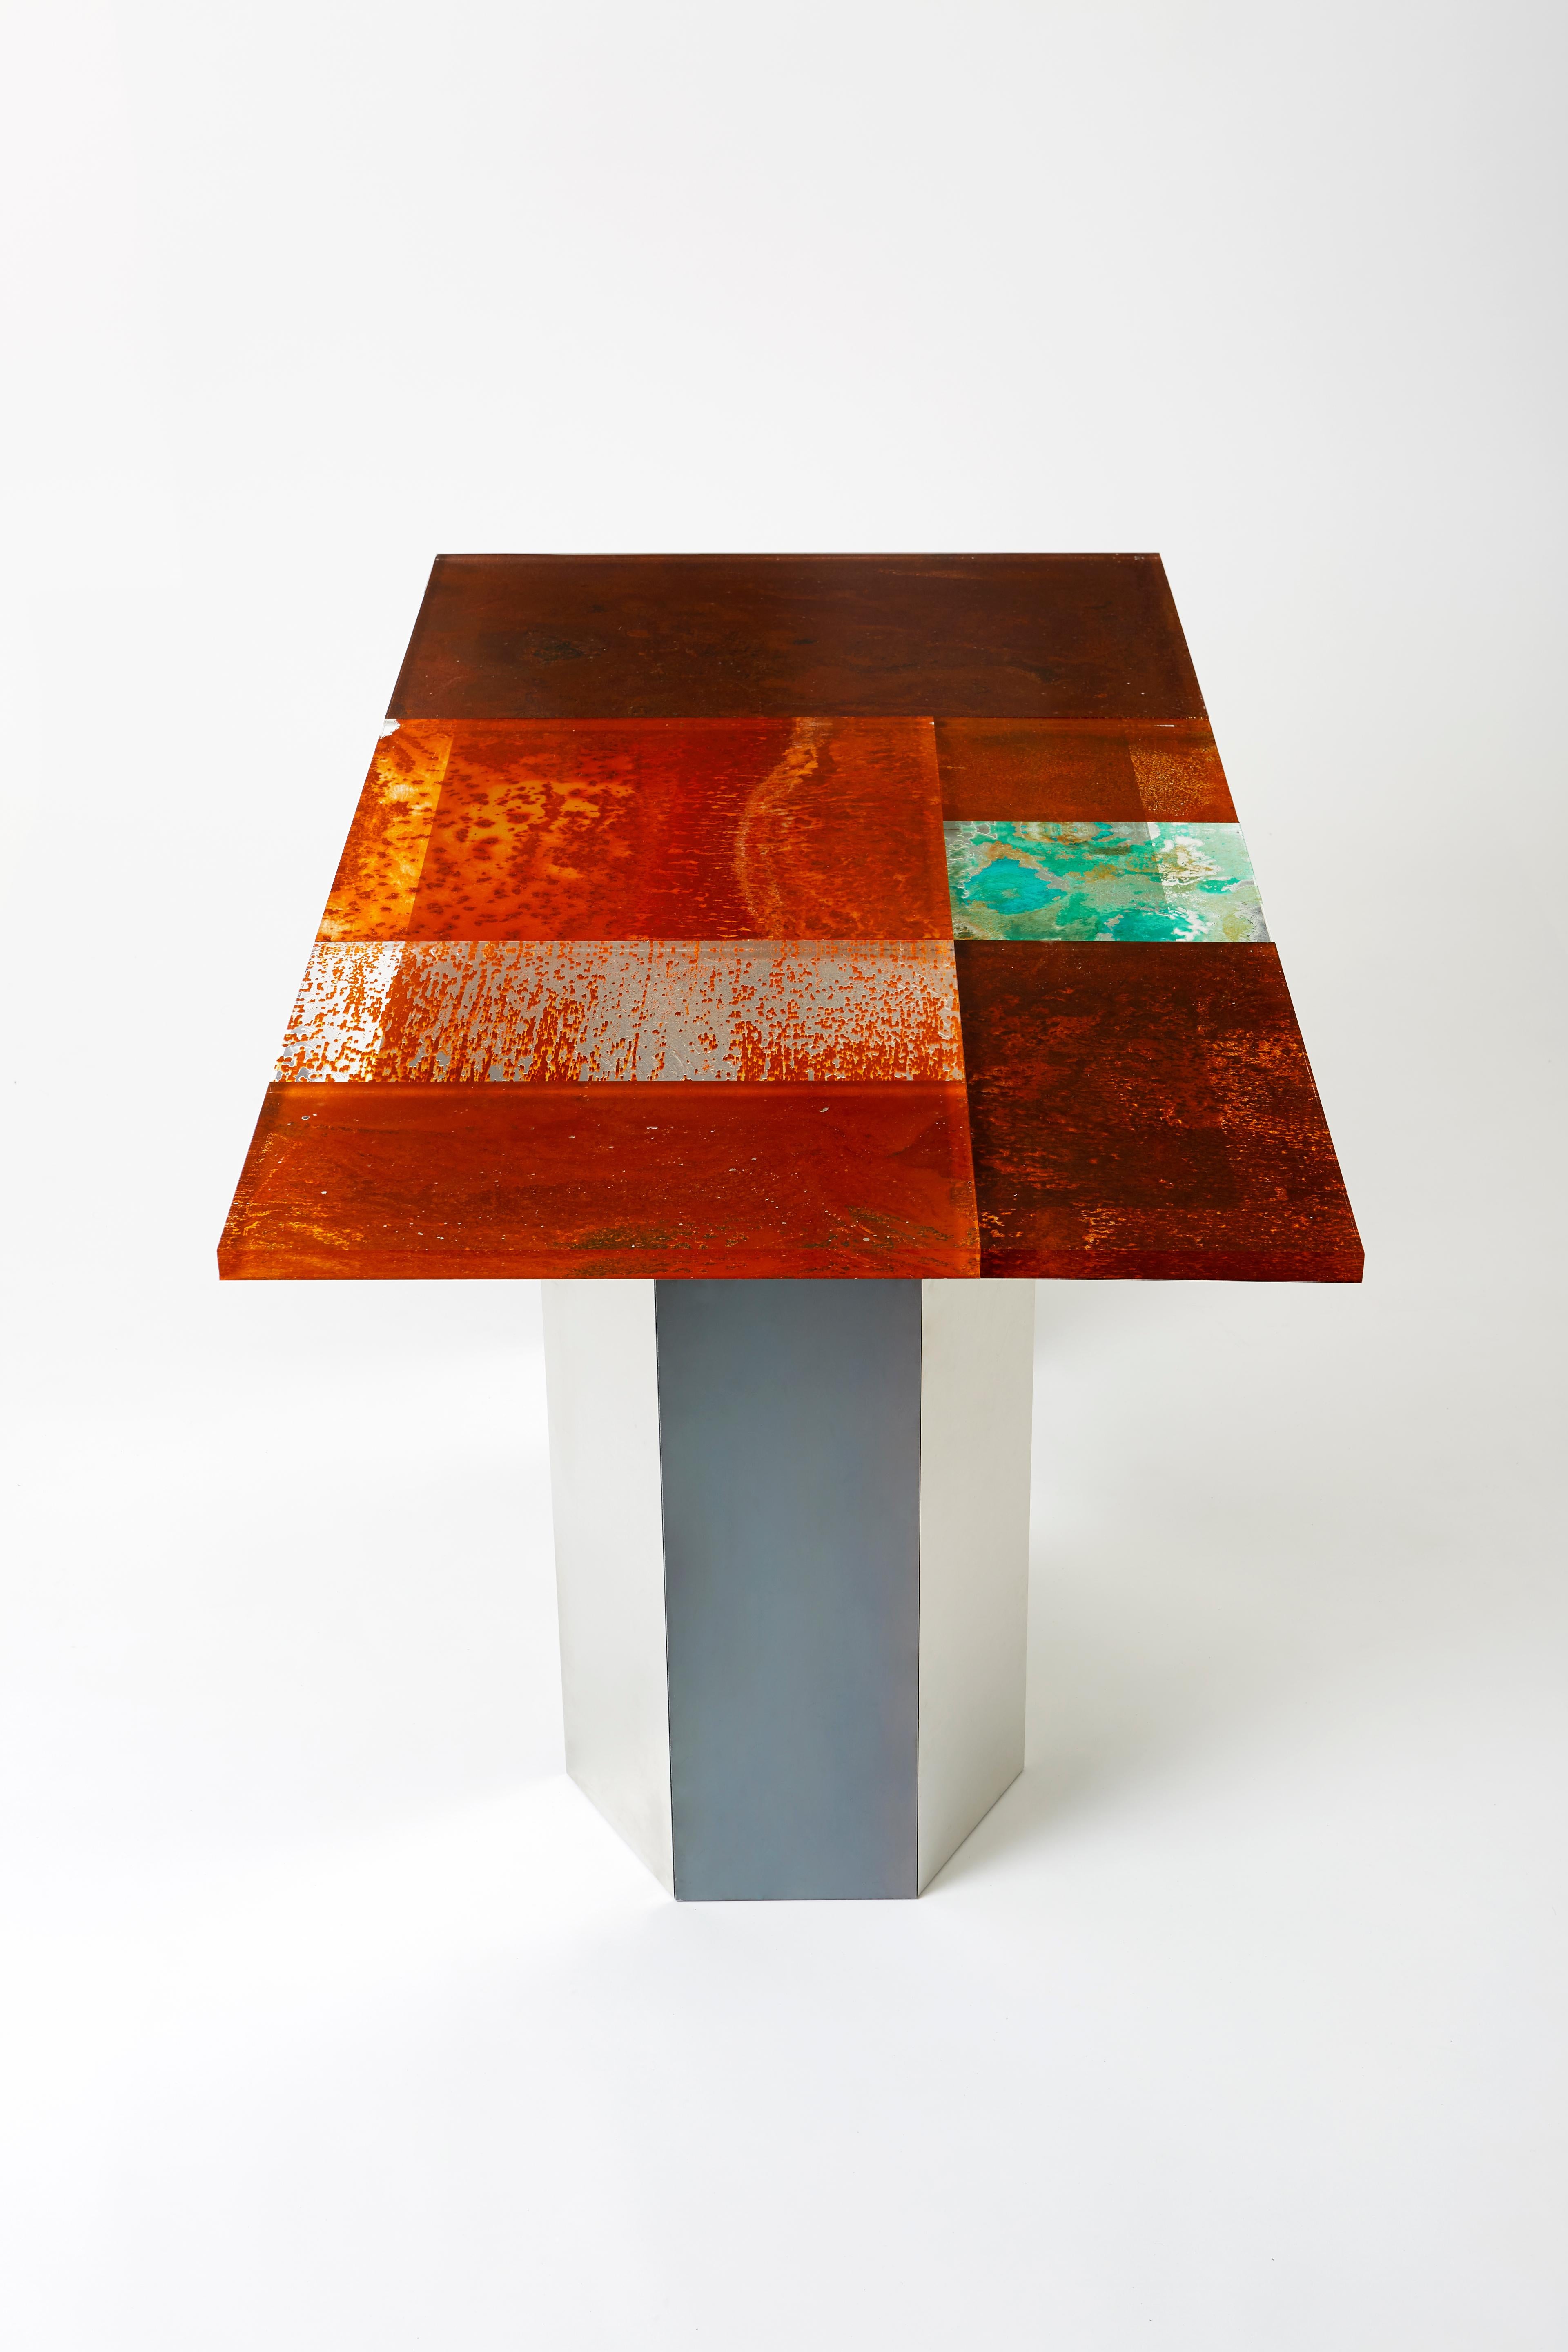 Dining table designed by Yuma Kano.
Unique surface material of doors are acrylic. This acrylic is what rust was transformed. Artist calls it 